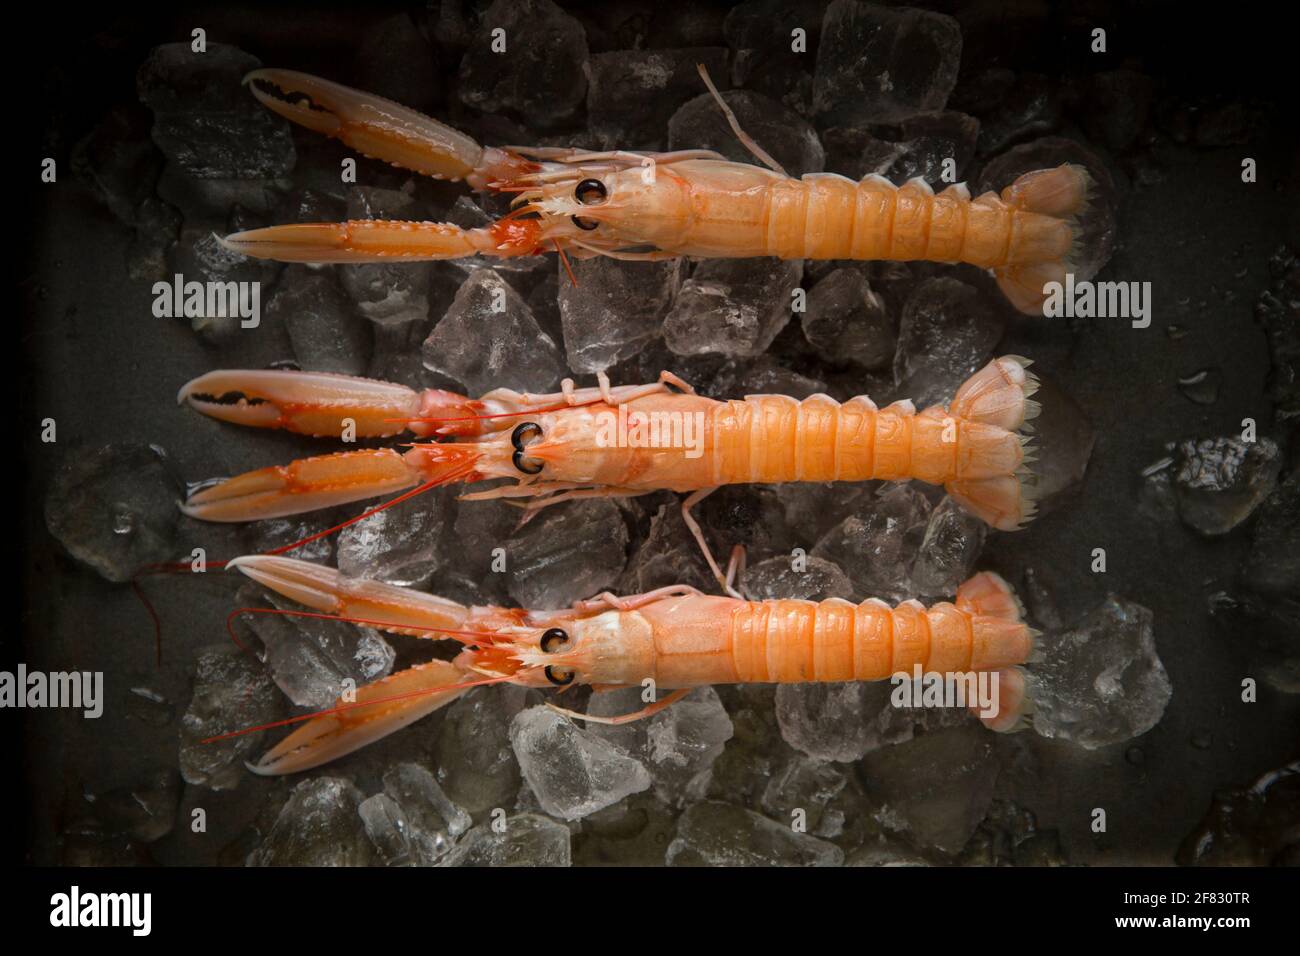 Raw Langoustines, or Dublin Bay prawns, Nephrops norvegicus, that were caught in the North East Atlantic that have been bought from a supermarket in t Stock Photo